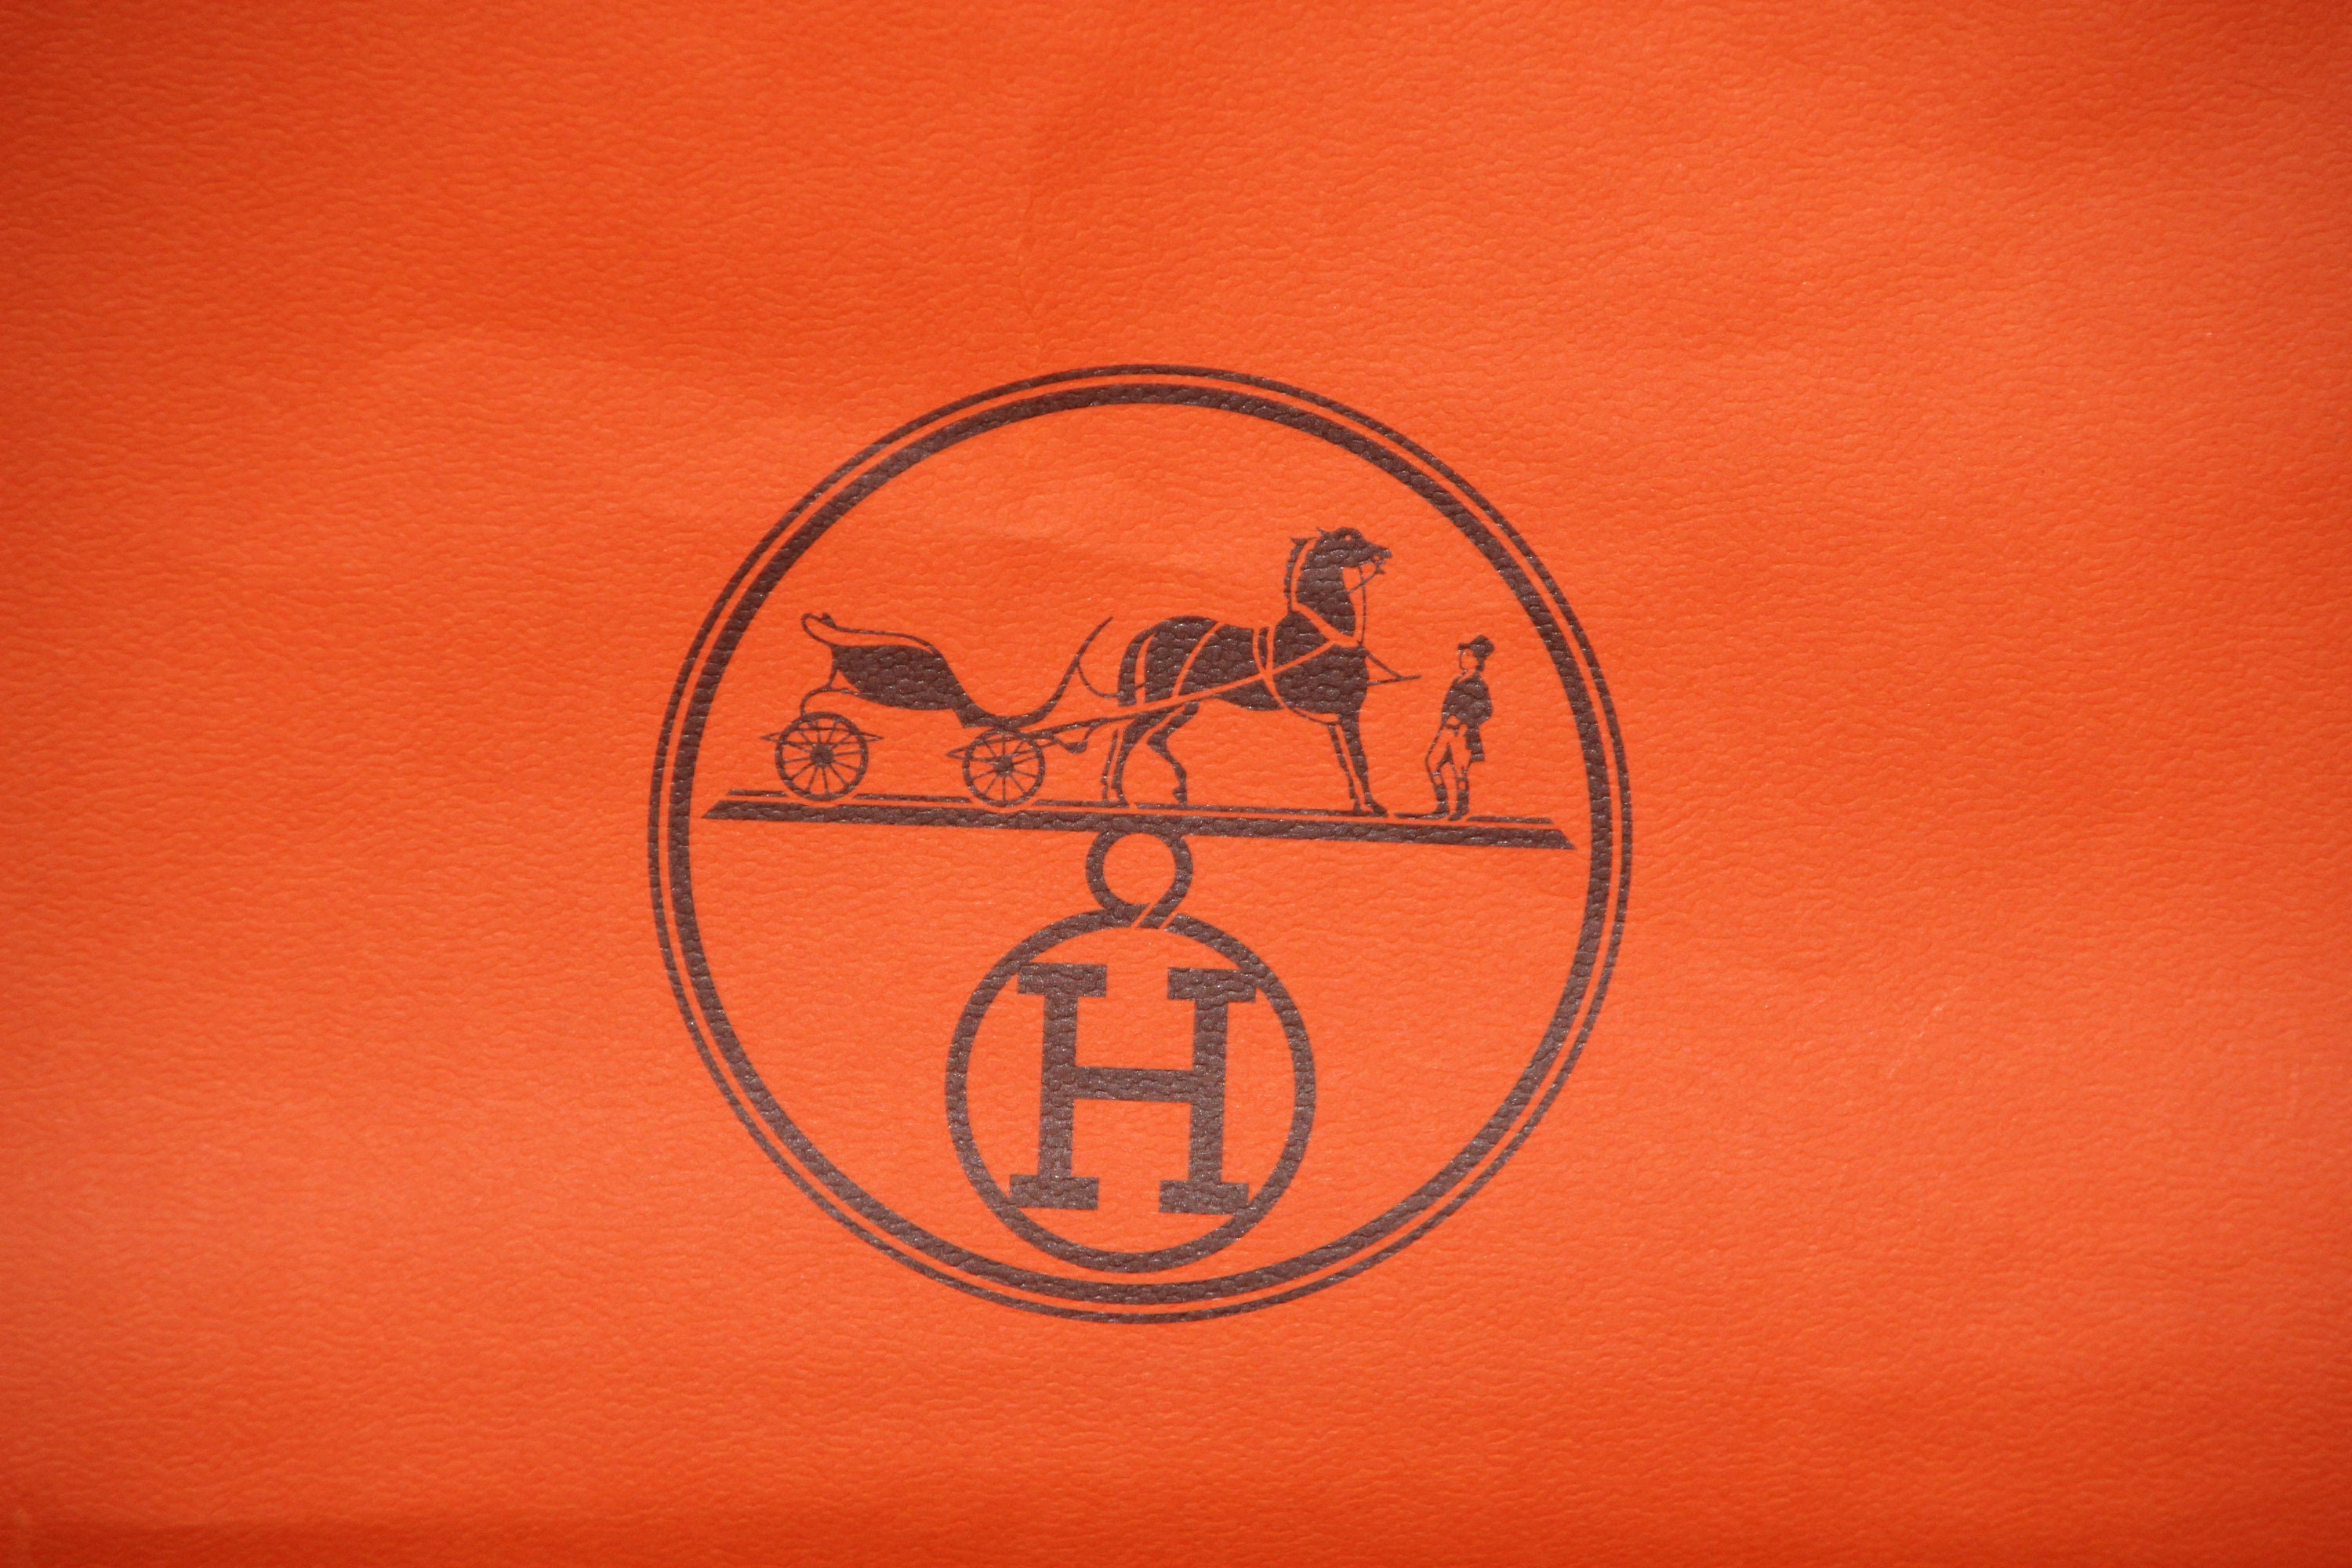 authentic hermes orange shopping bag with ribbon. approx 12x12x4.